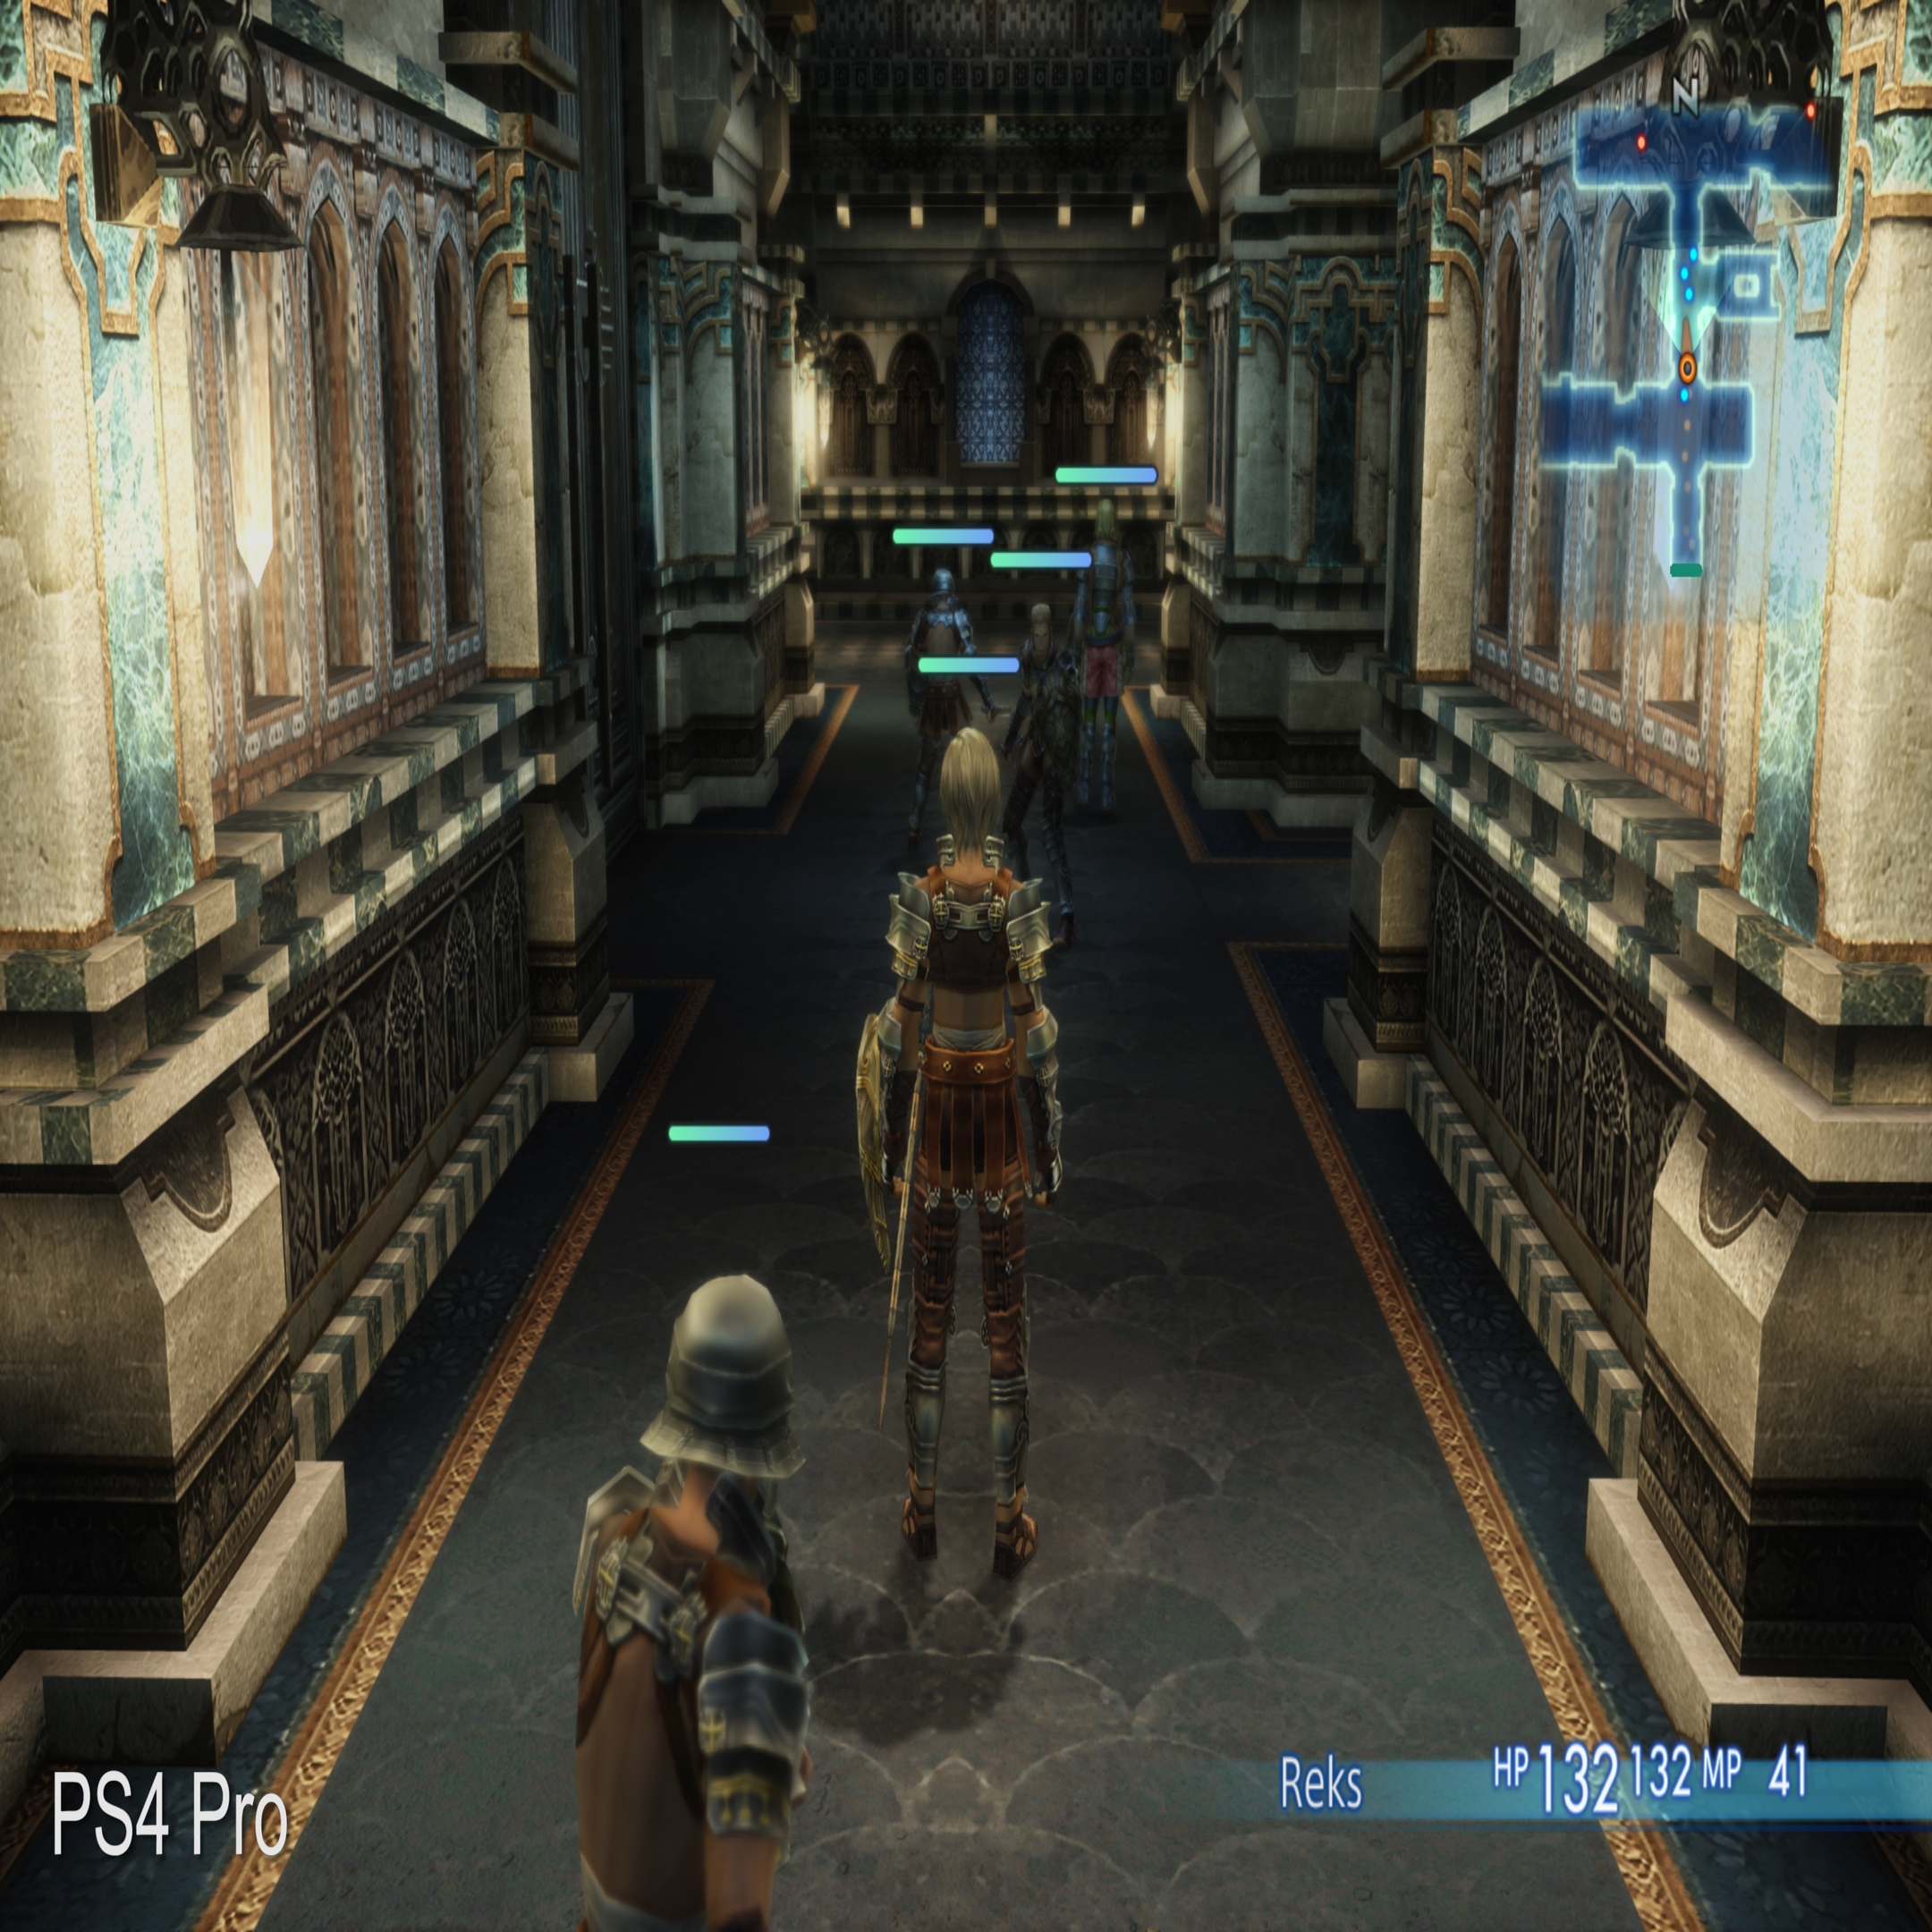 Review: 'Final Fantasy XII' on PS4 -- a vision perfected